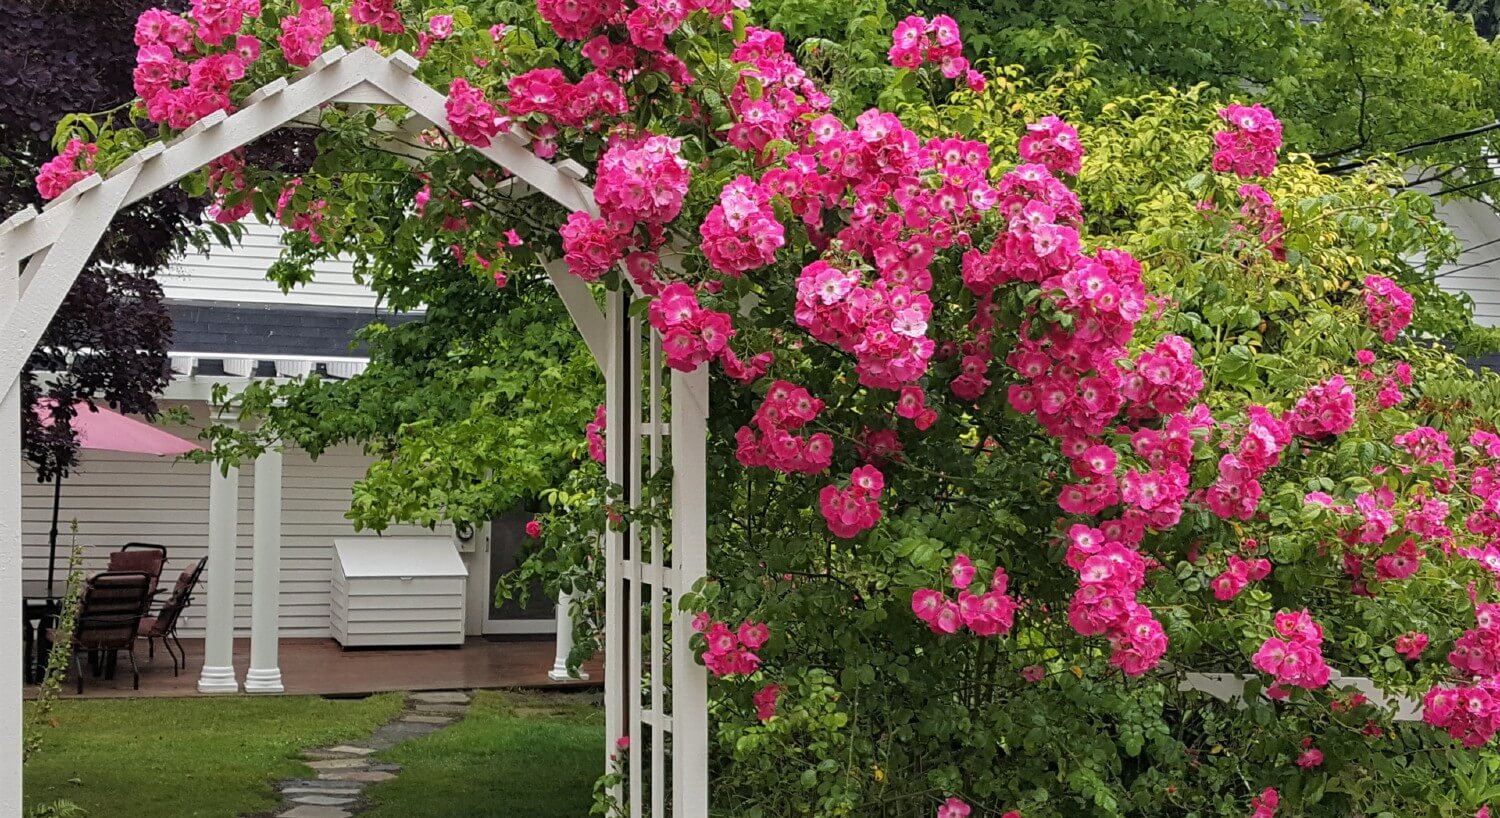 Tall white pergola gate surrounded by a large bush full of bright pink flowers with a white house in the background